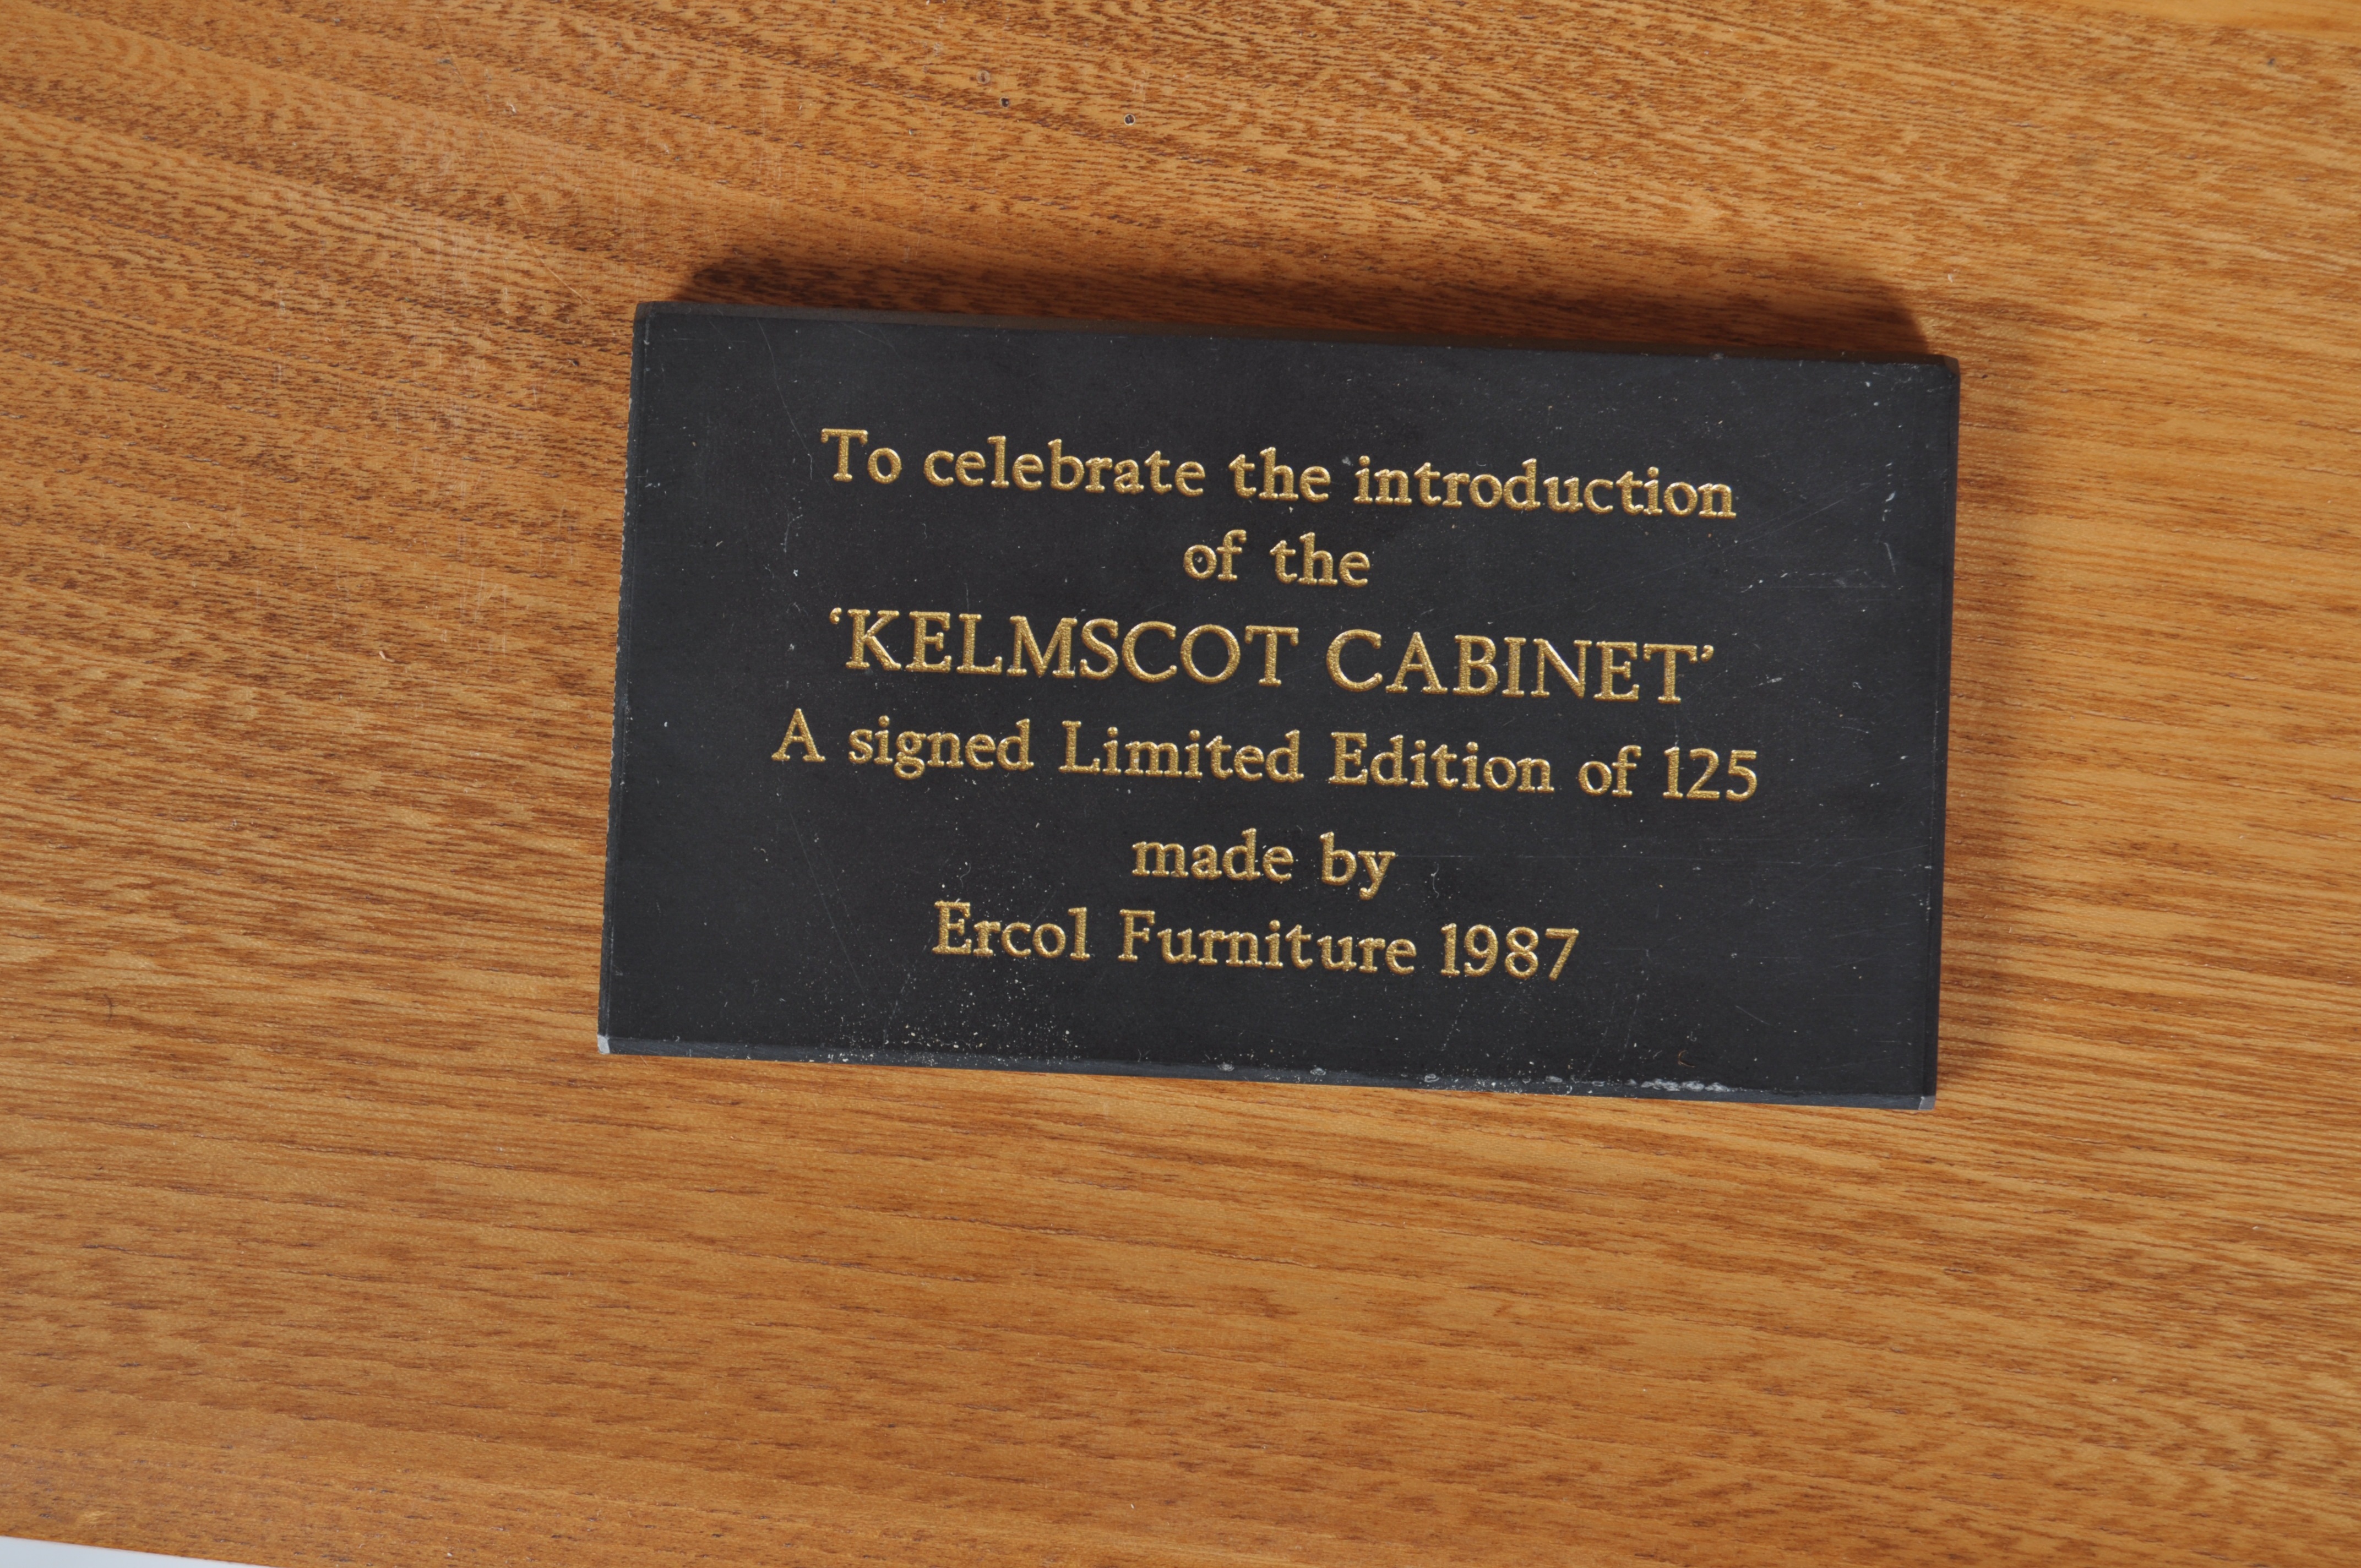 INCREDIBLY RARE ERCOL KELMSCOT LIMITED EDITION CABINET - Image 7 of 7